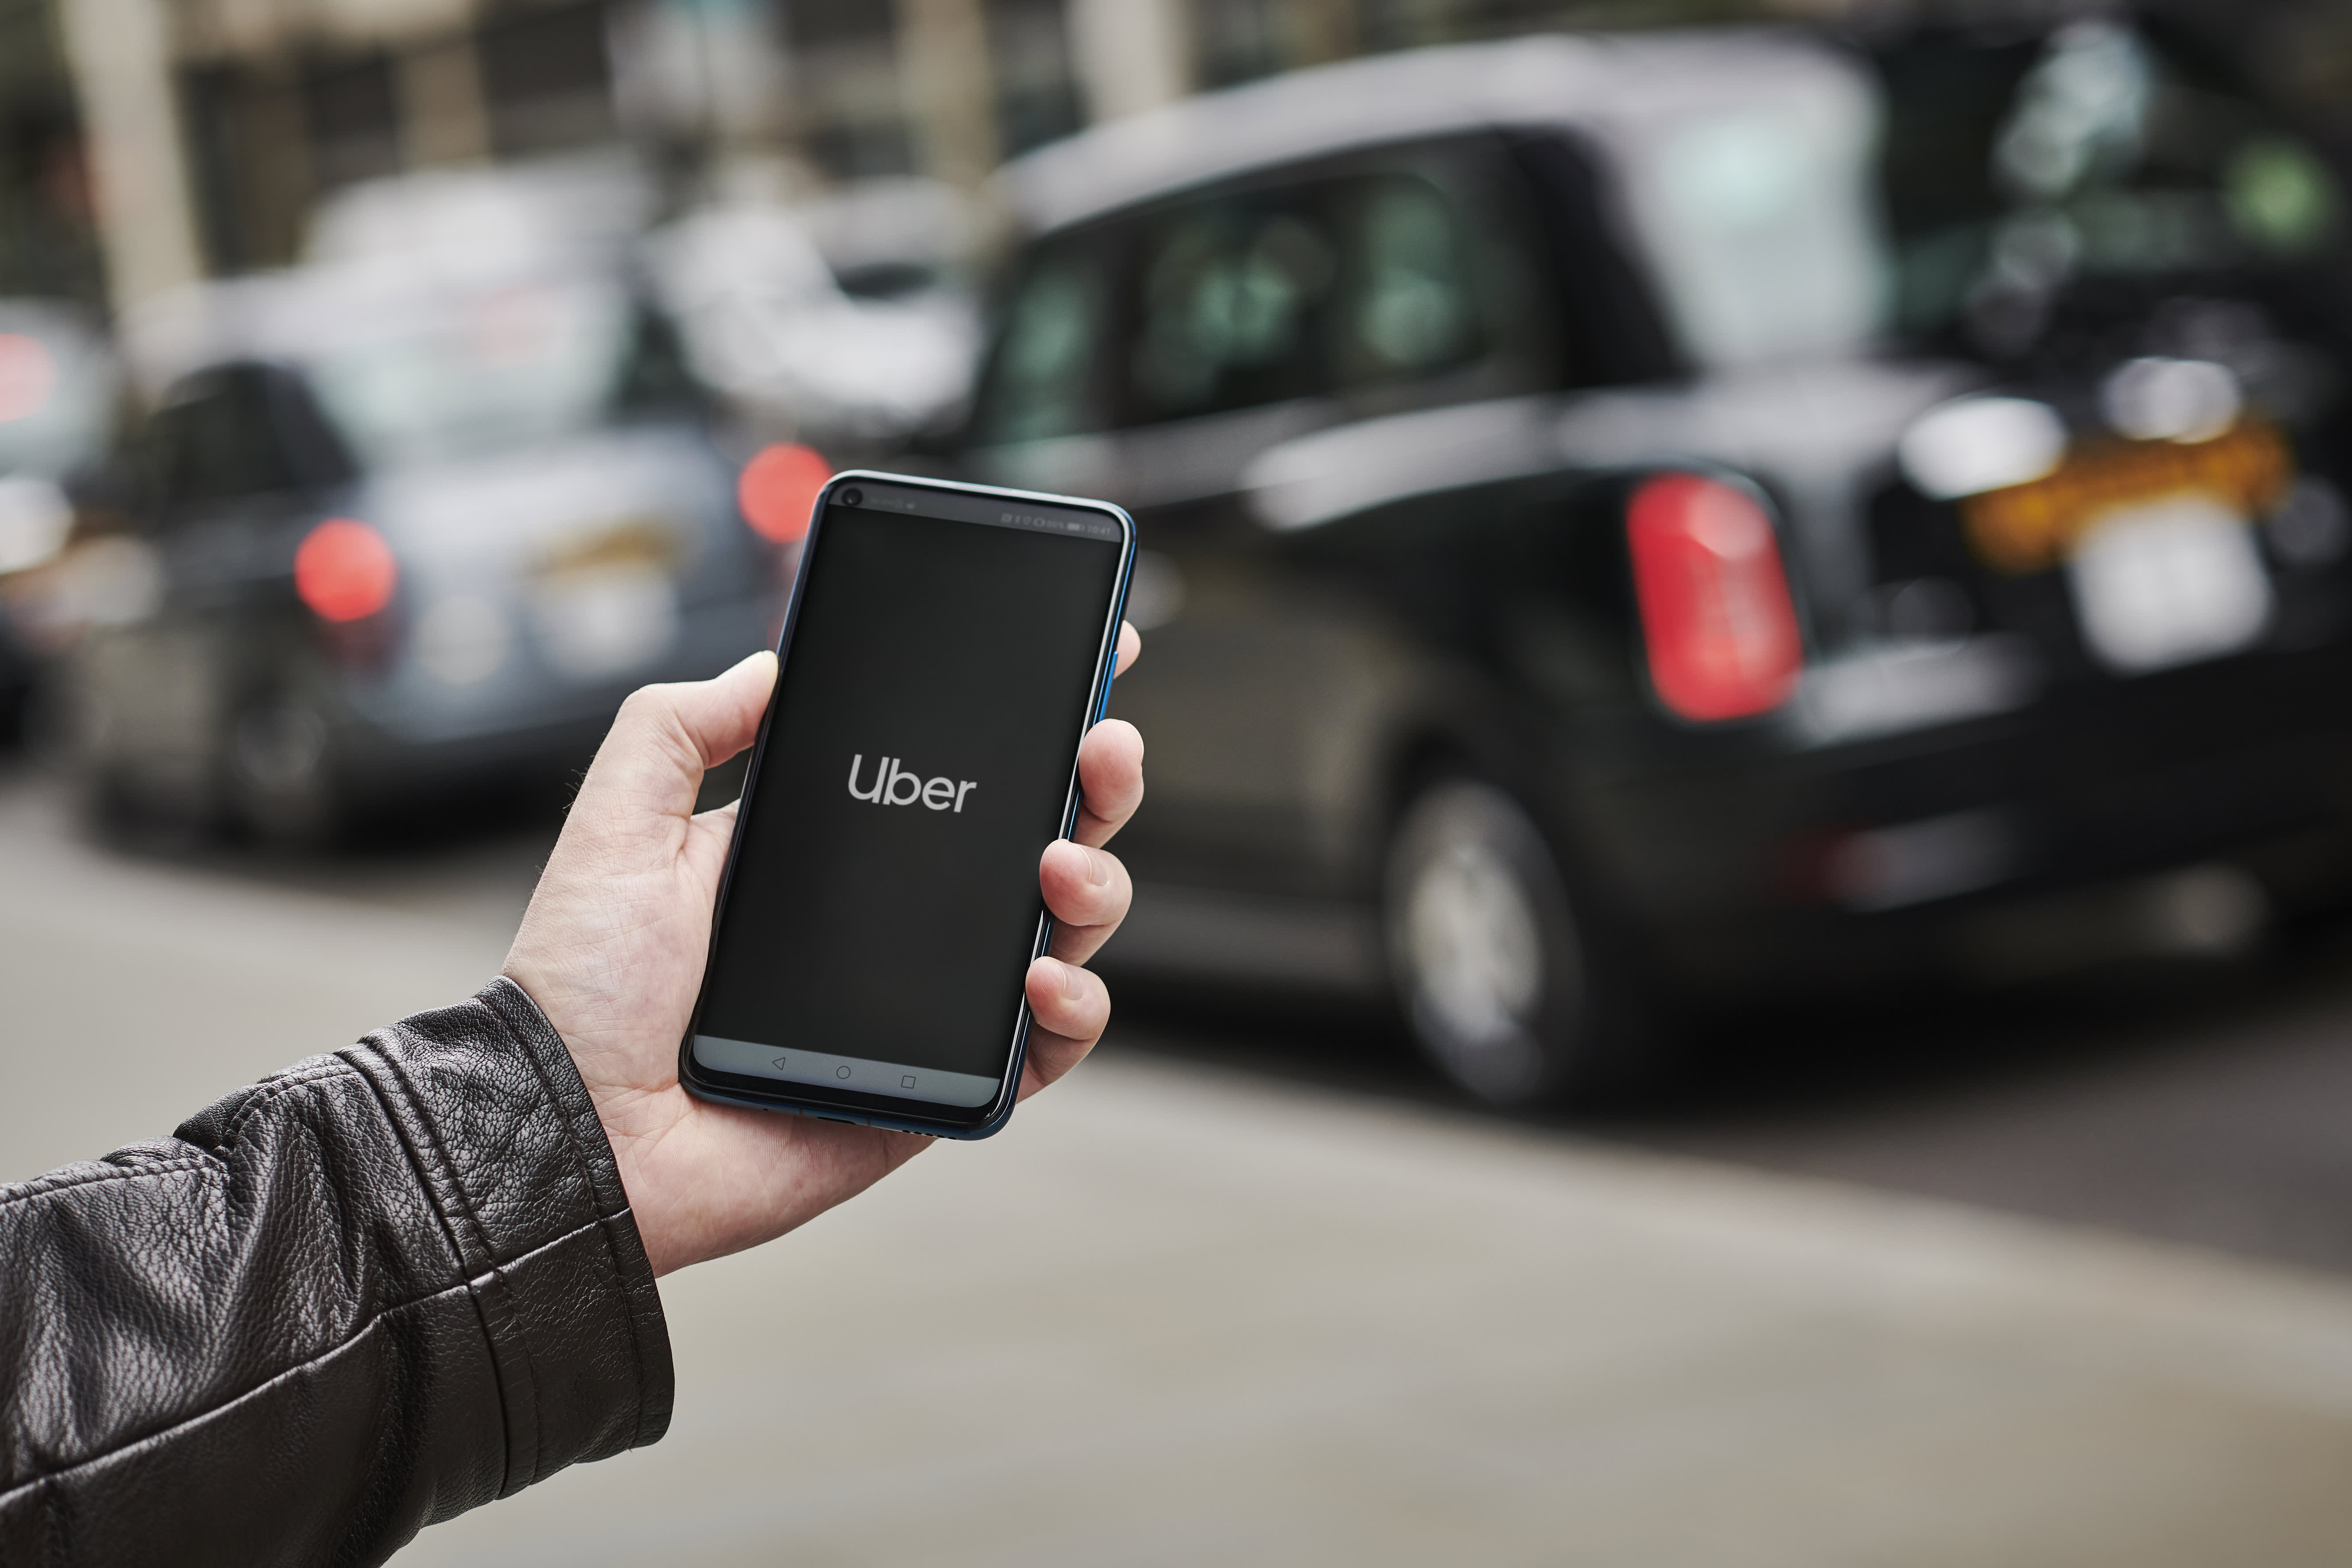 Uber wins legal fight to regain London license - CNBC